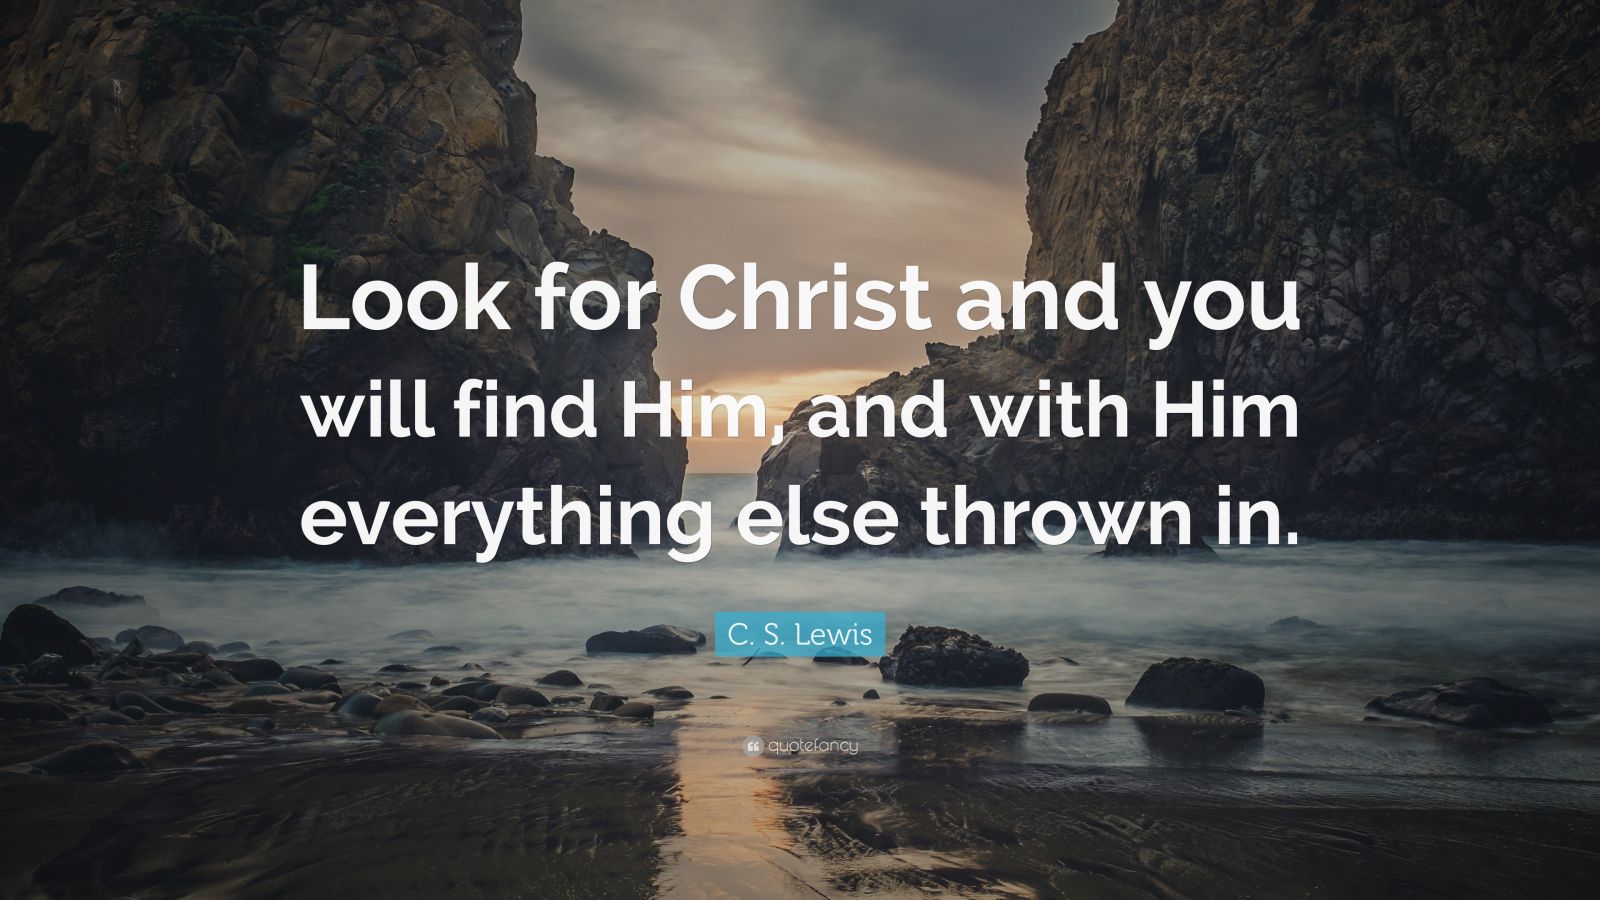 C S Lewis Quote “look For Christ And You Will Find Him And With Him